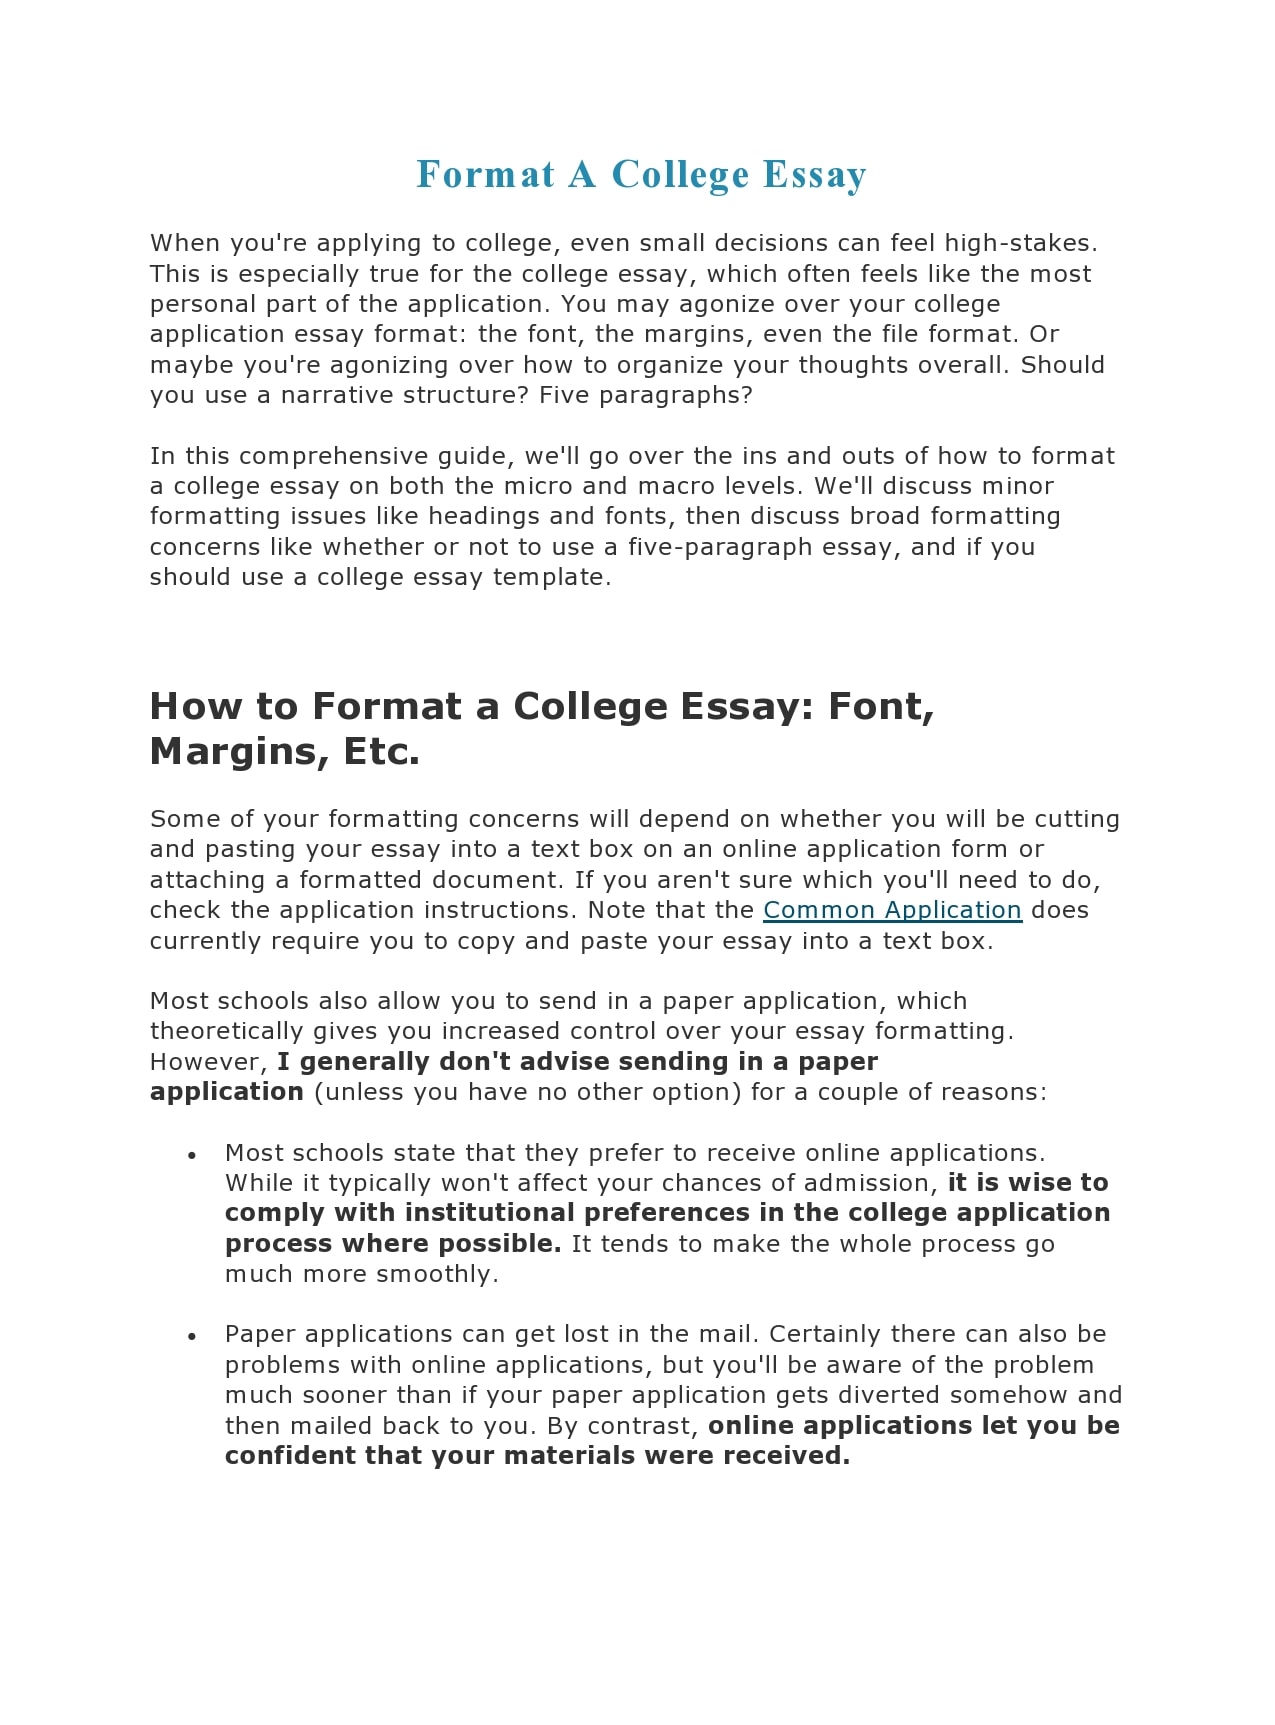 how to make a college essay better